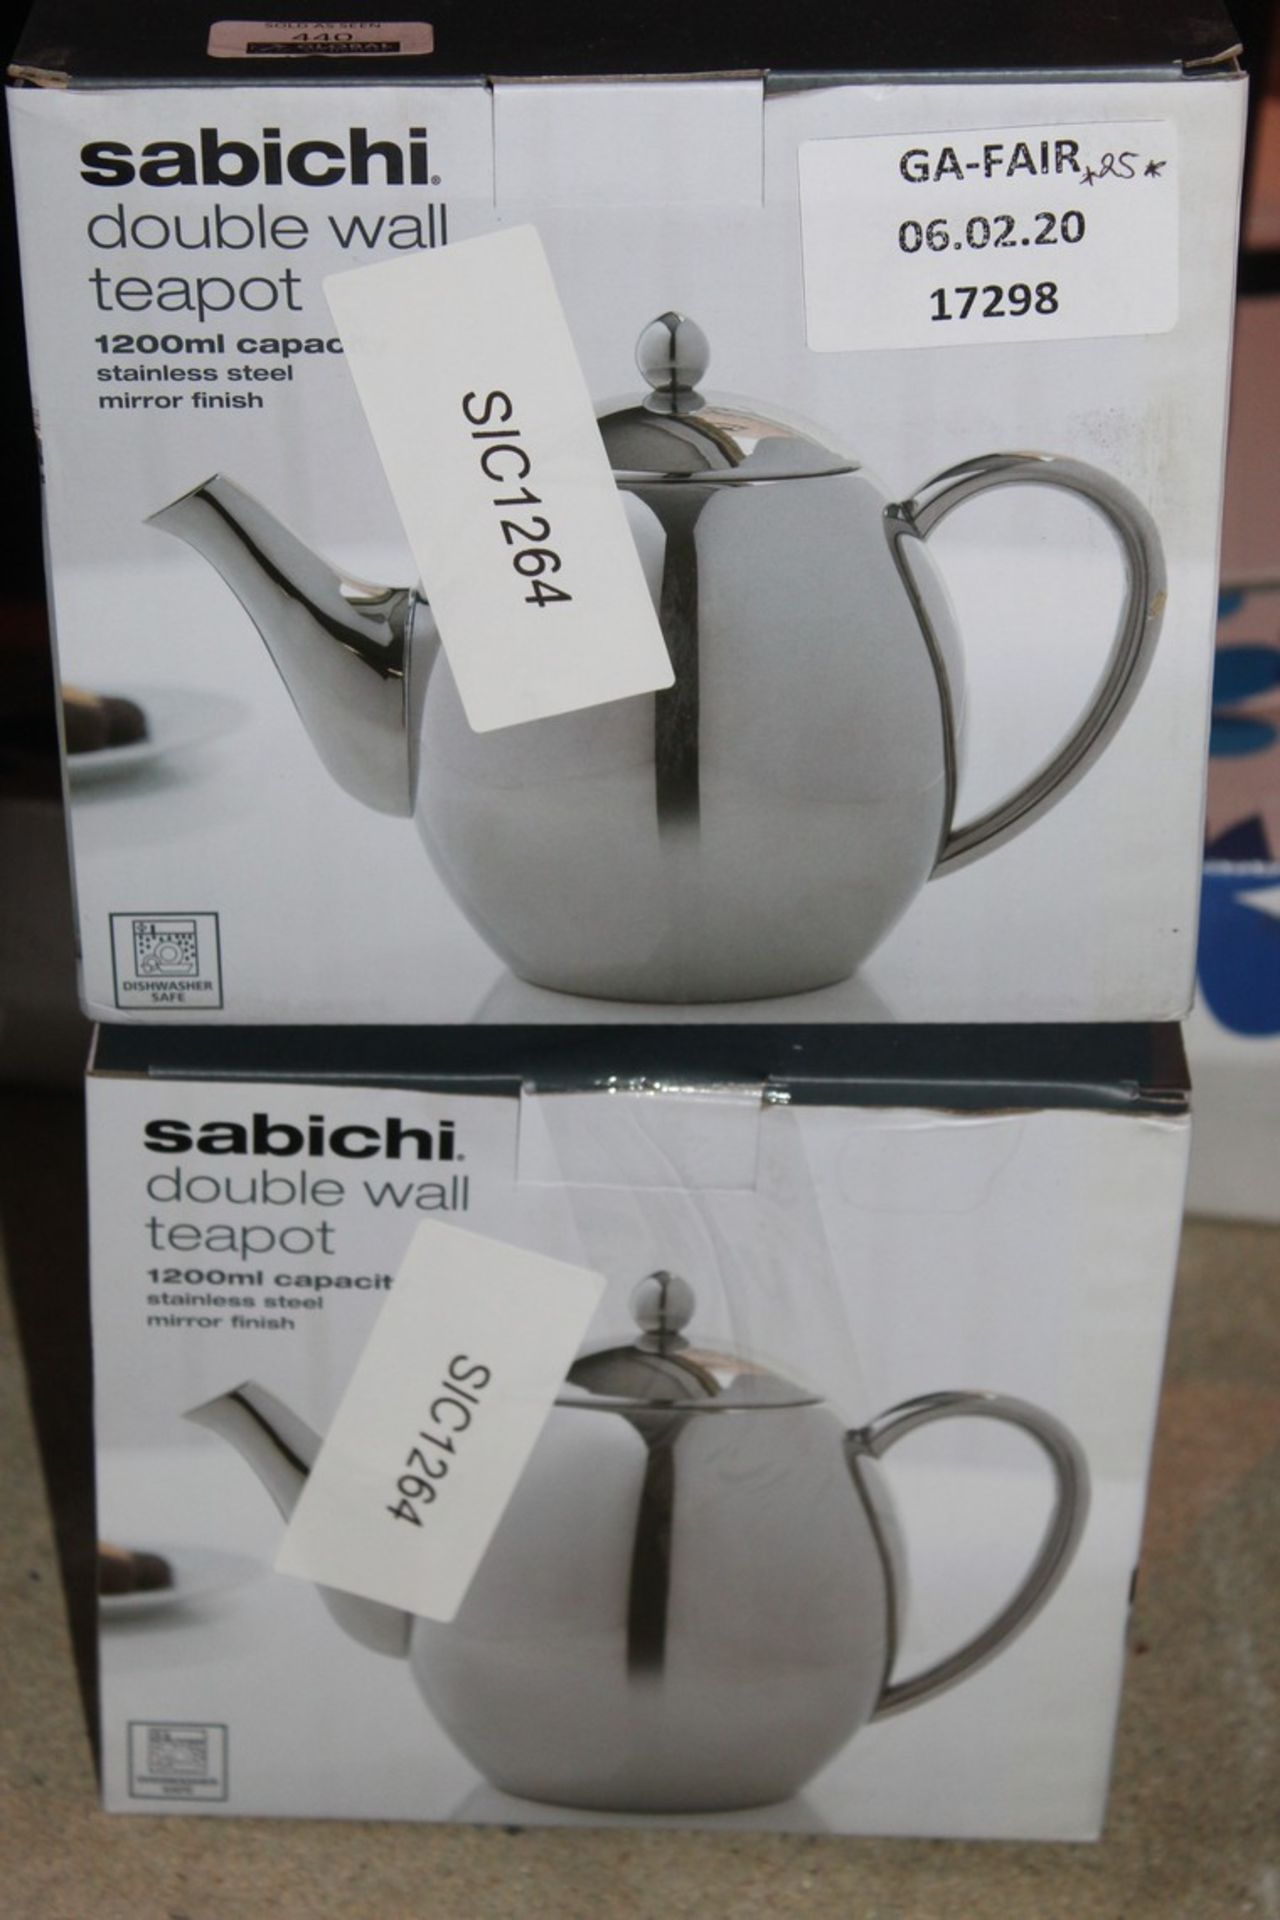 Lot To Contain 2 Boxed Sabichi Double Wall Tea Pots RRP £60 (17298) (06.02.20) (Public Viewing and